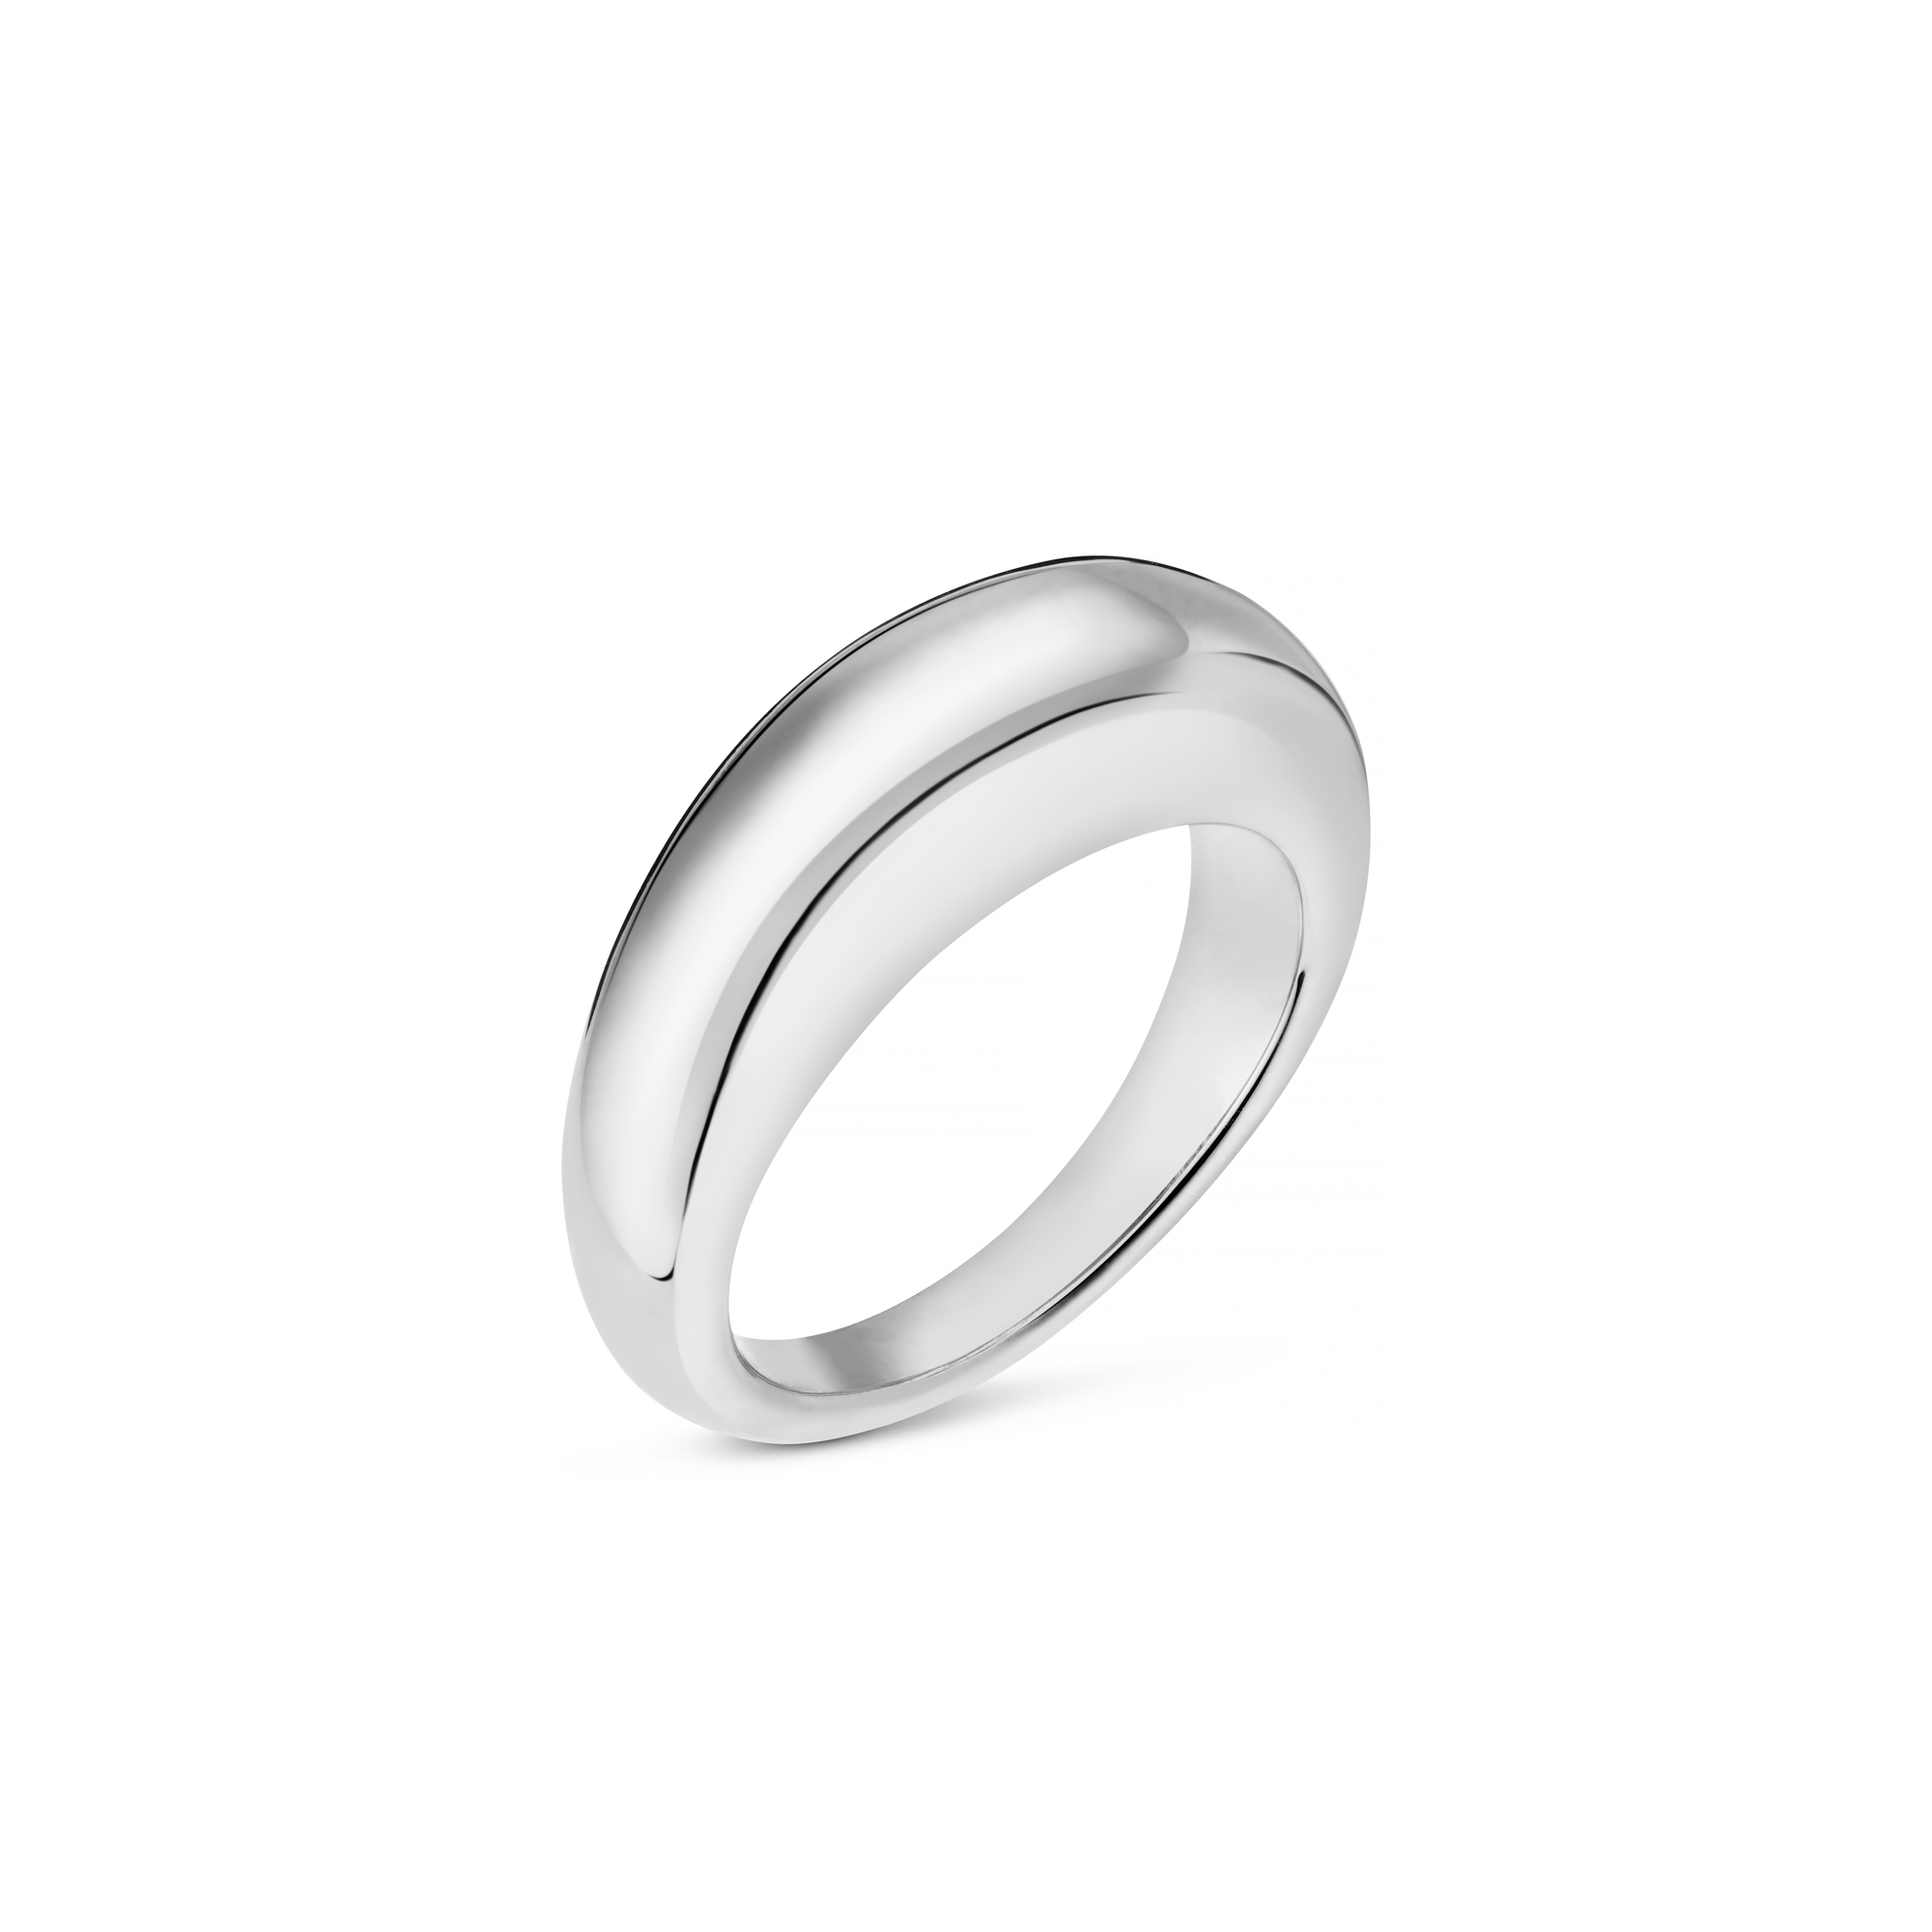 LUXE Domed Ring - Silver M/L - Orelia LUXE